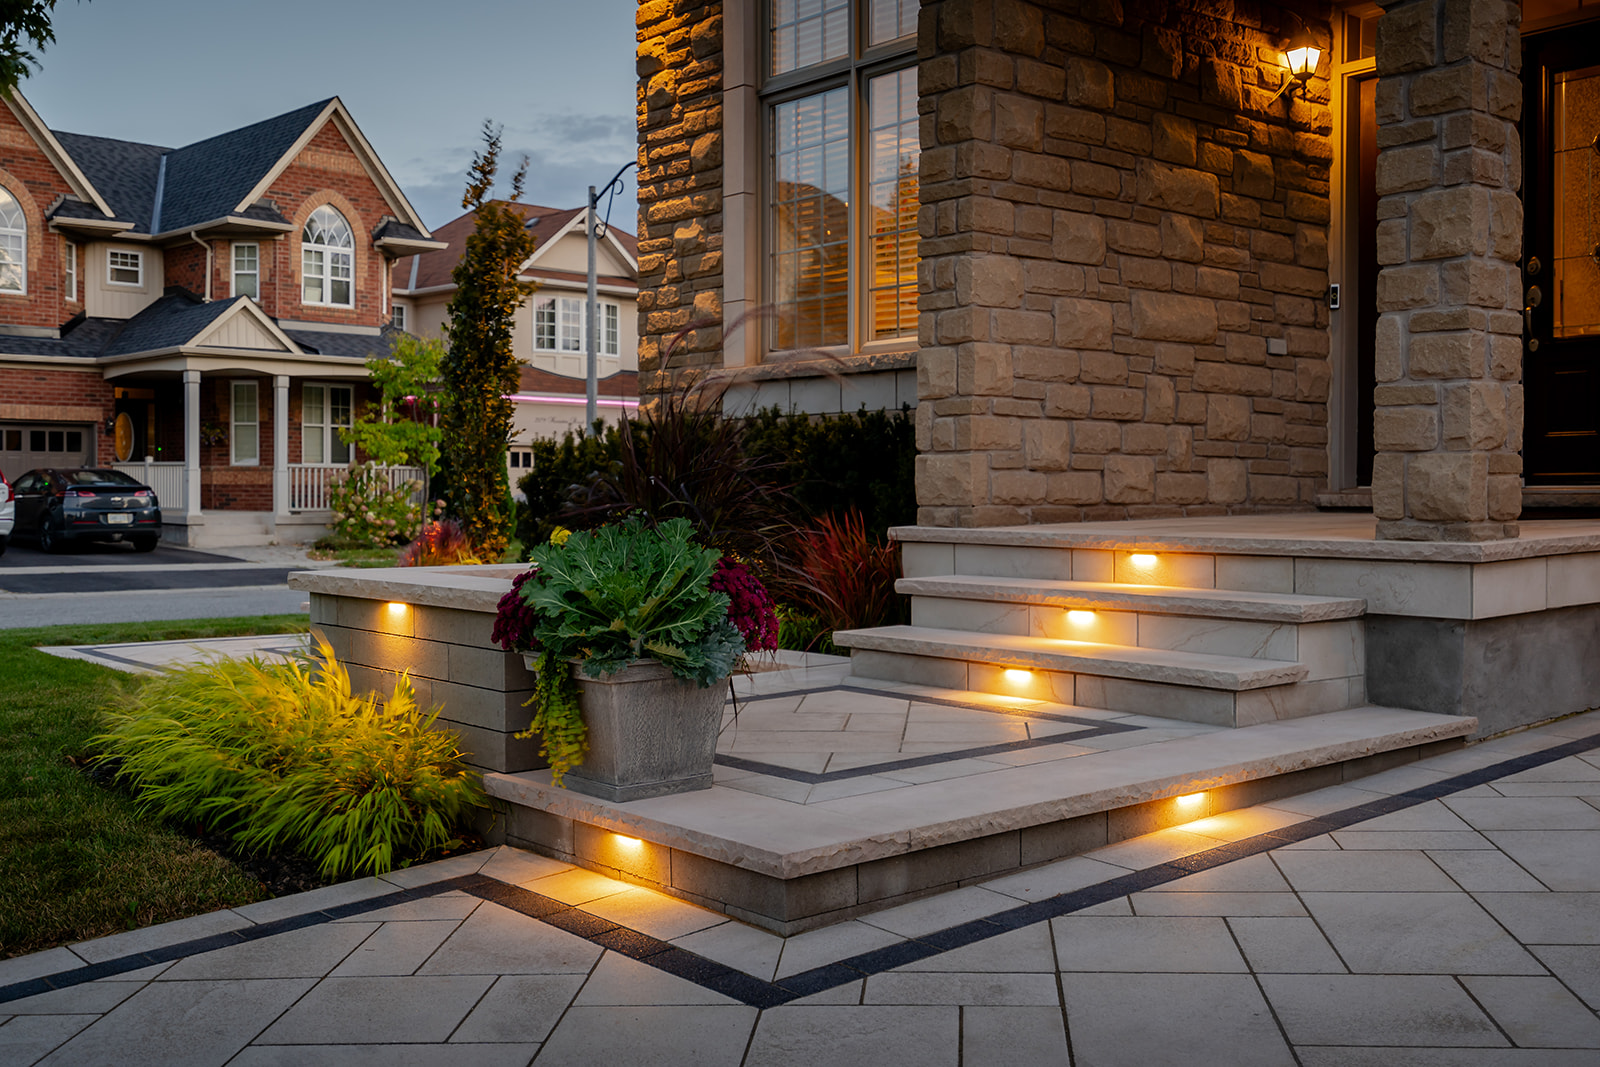 Patio stones leading up toward the house with lights on.